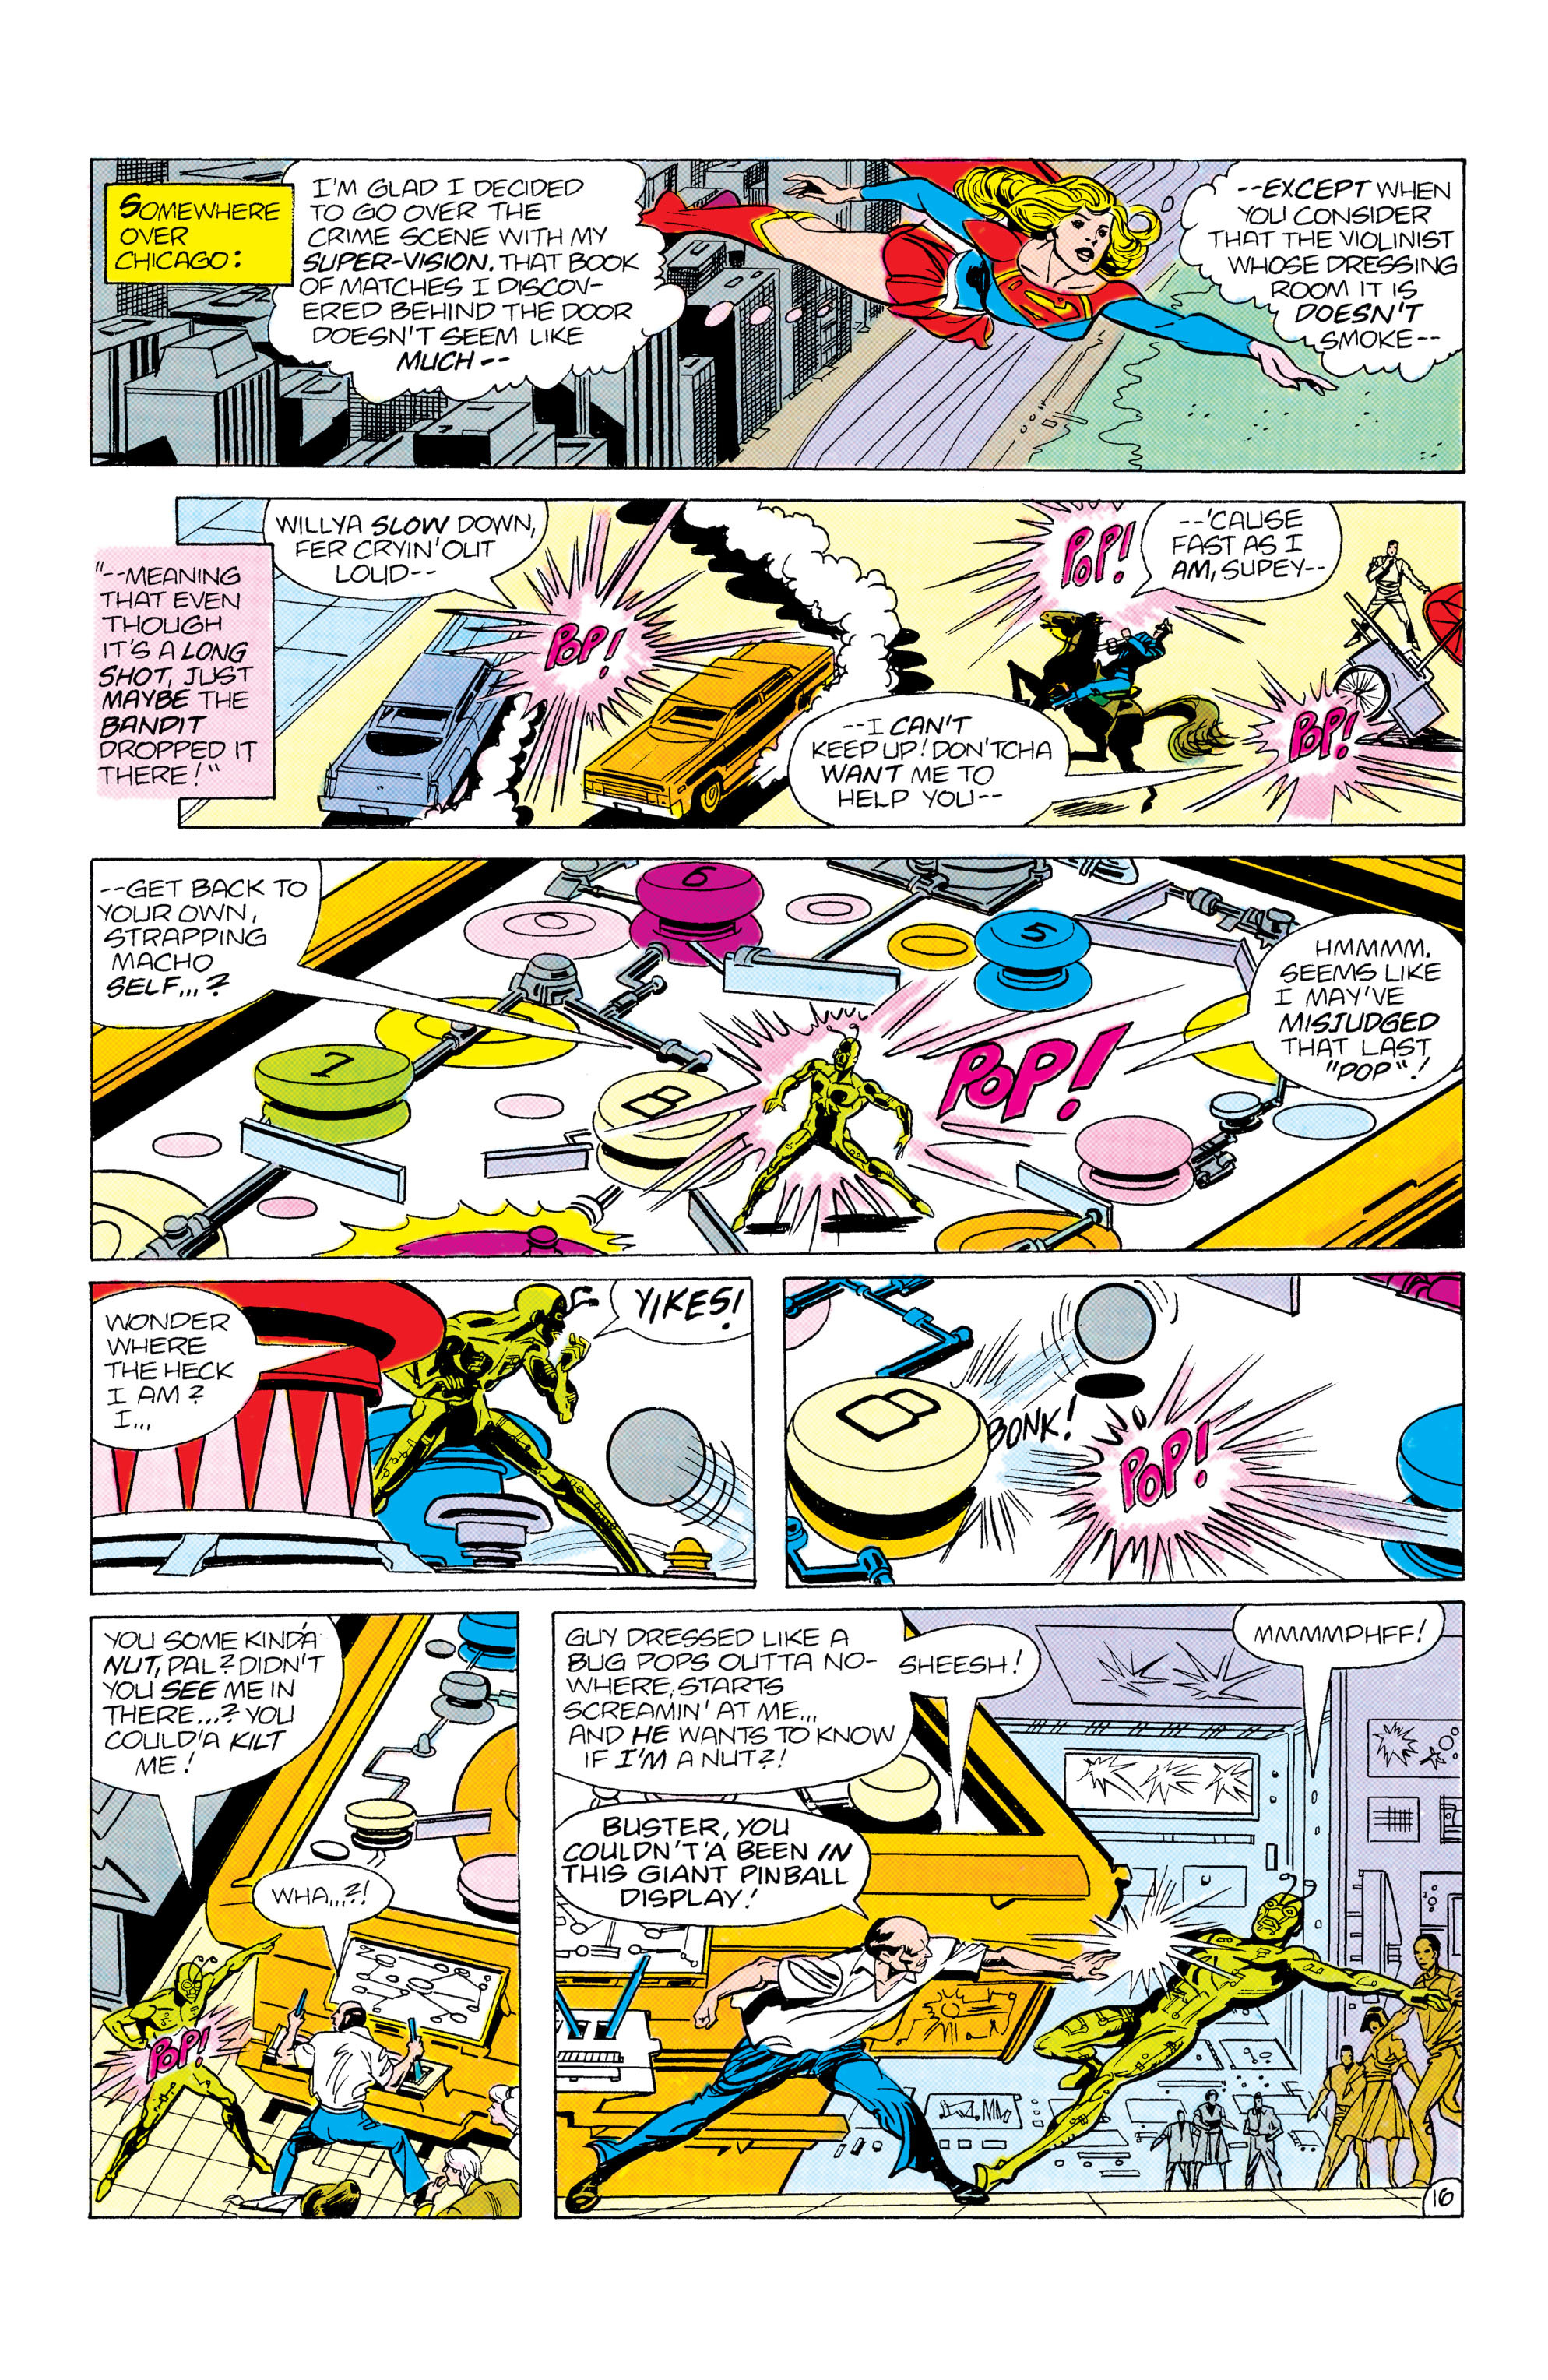 Supergirl (1982) 16 Page 16